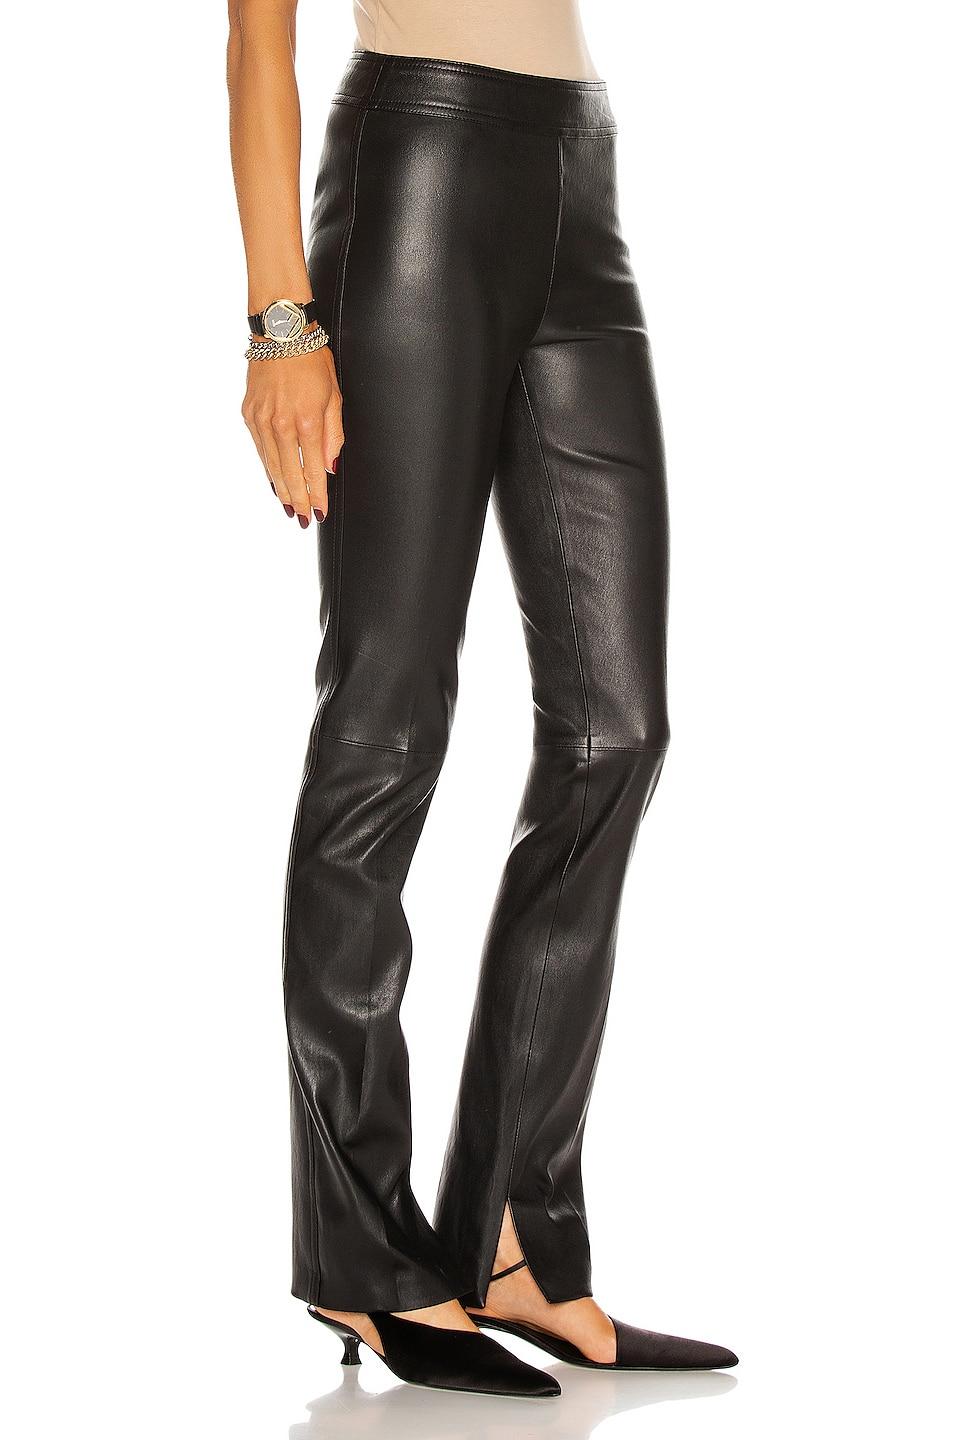 Helmut Lang Slit Leather Pant in Onyx (Black) - Lyst